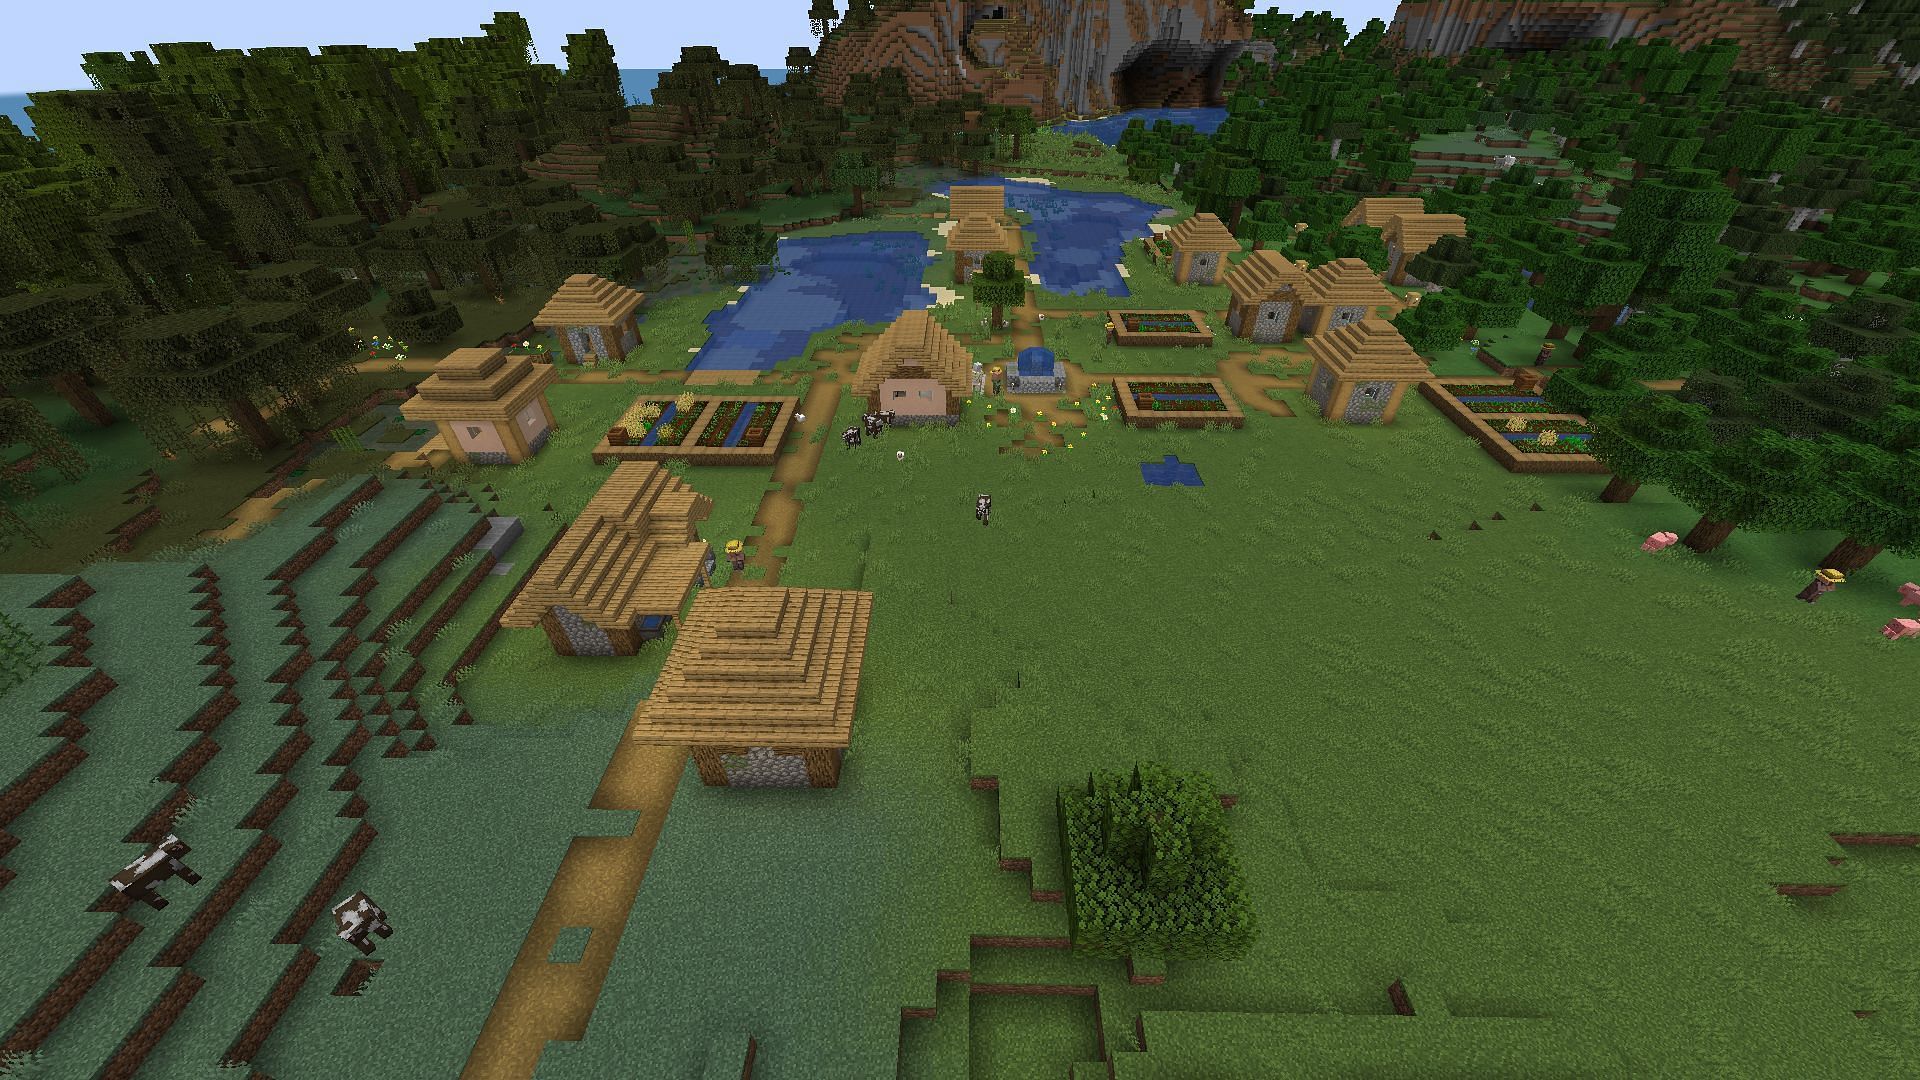 Spawn in a village and find an island village in this Minecraft seed (Image via Mojang)